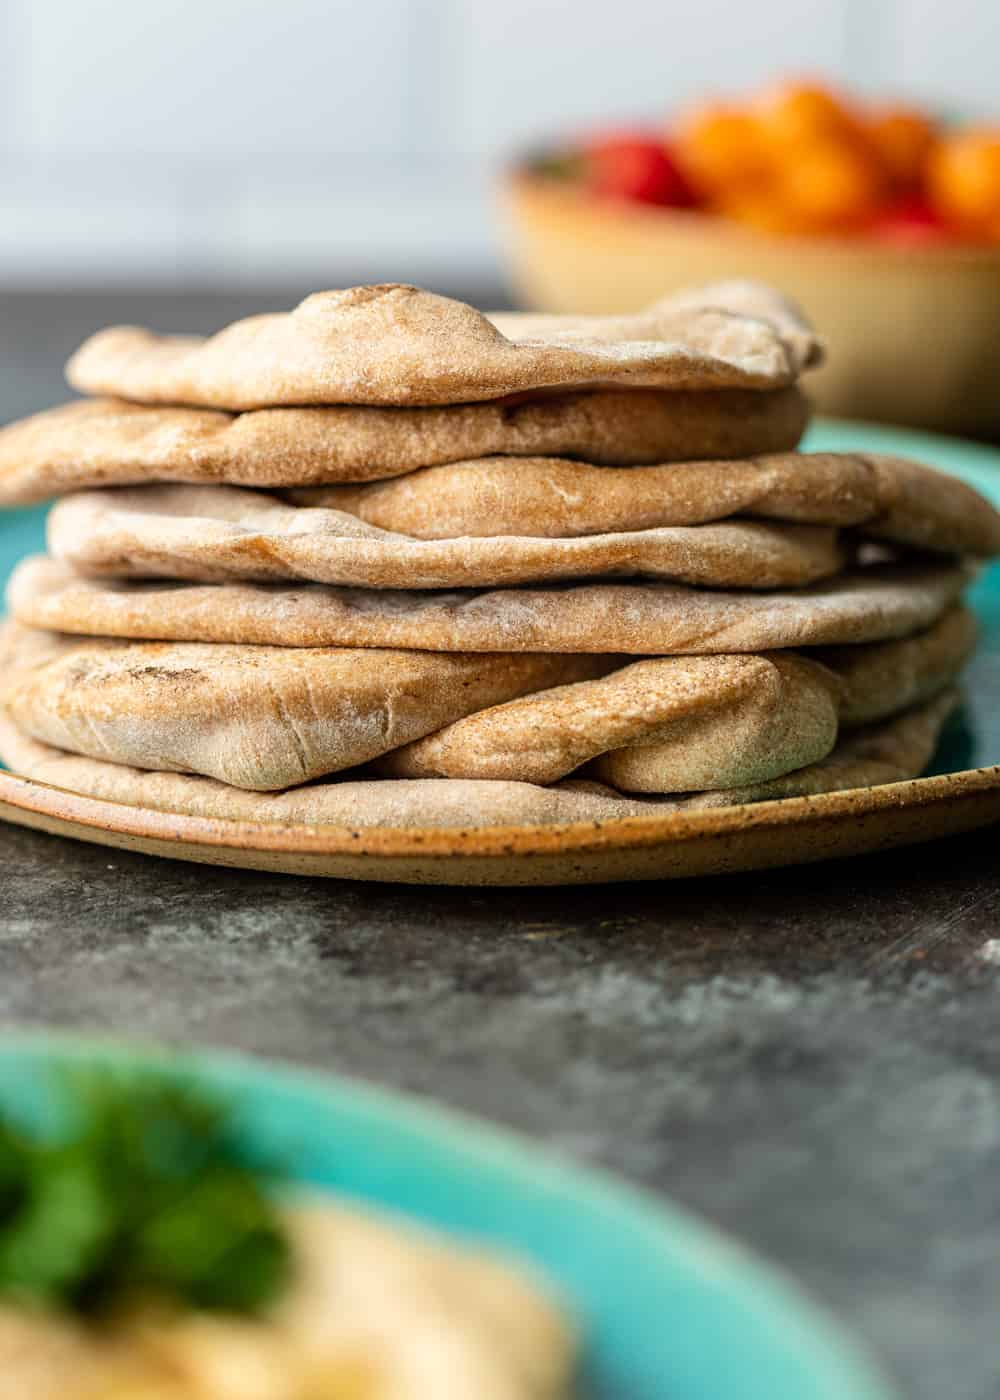 A stack of pita bread on a ceramic plate.